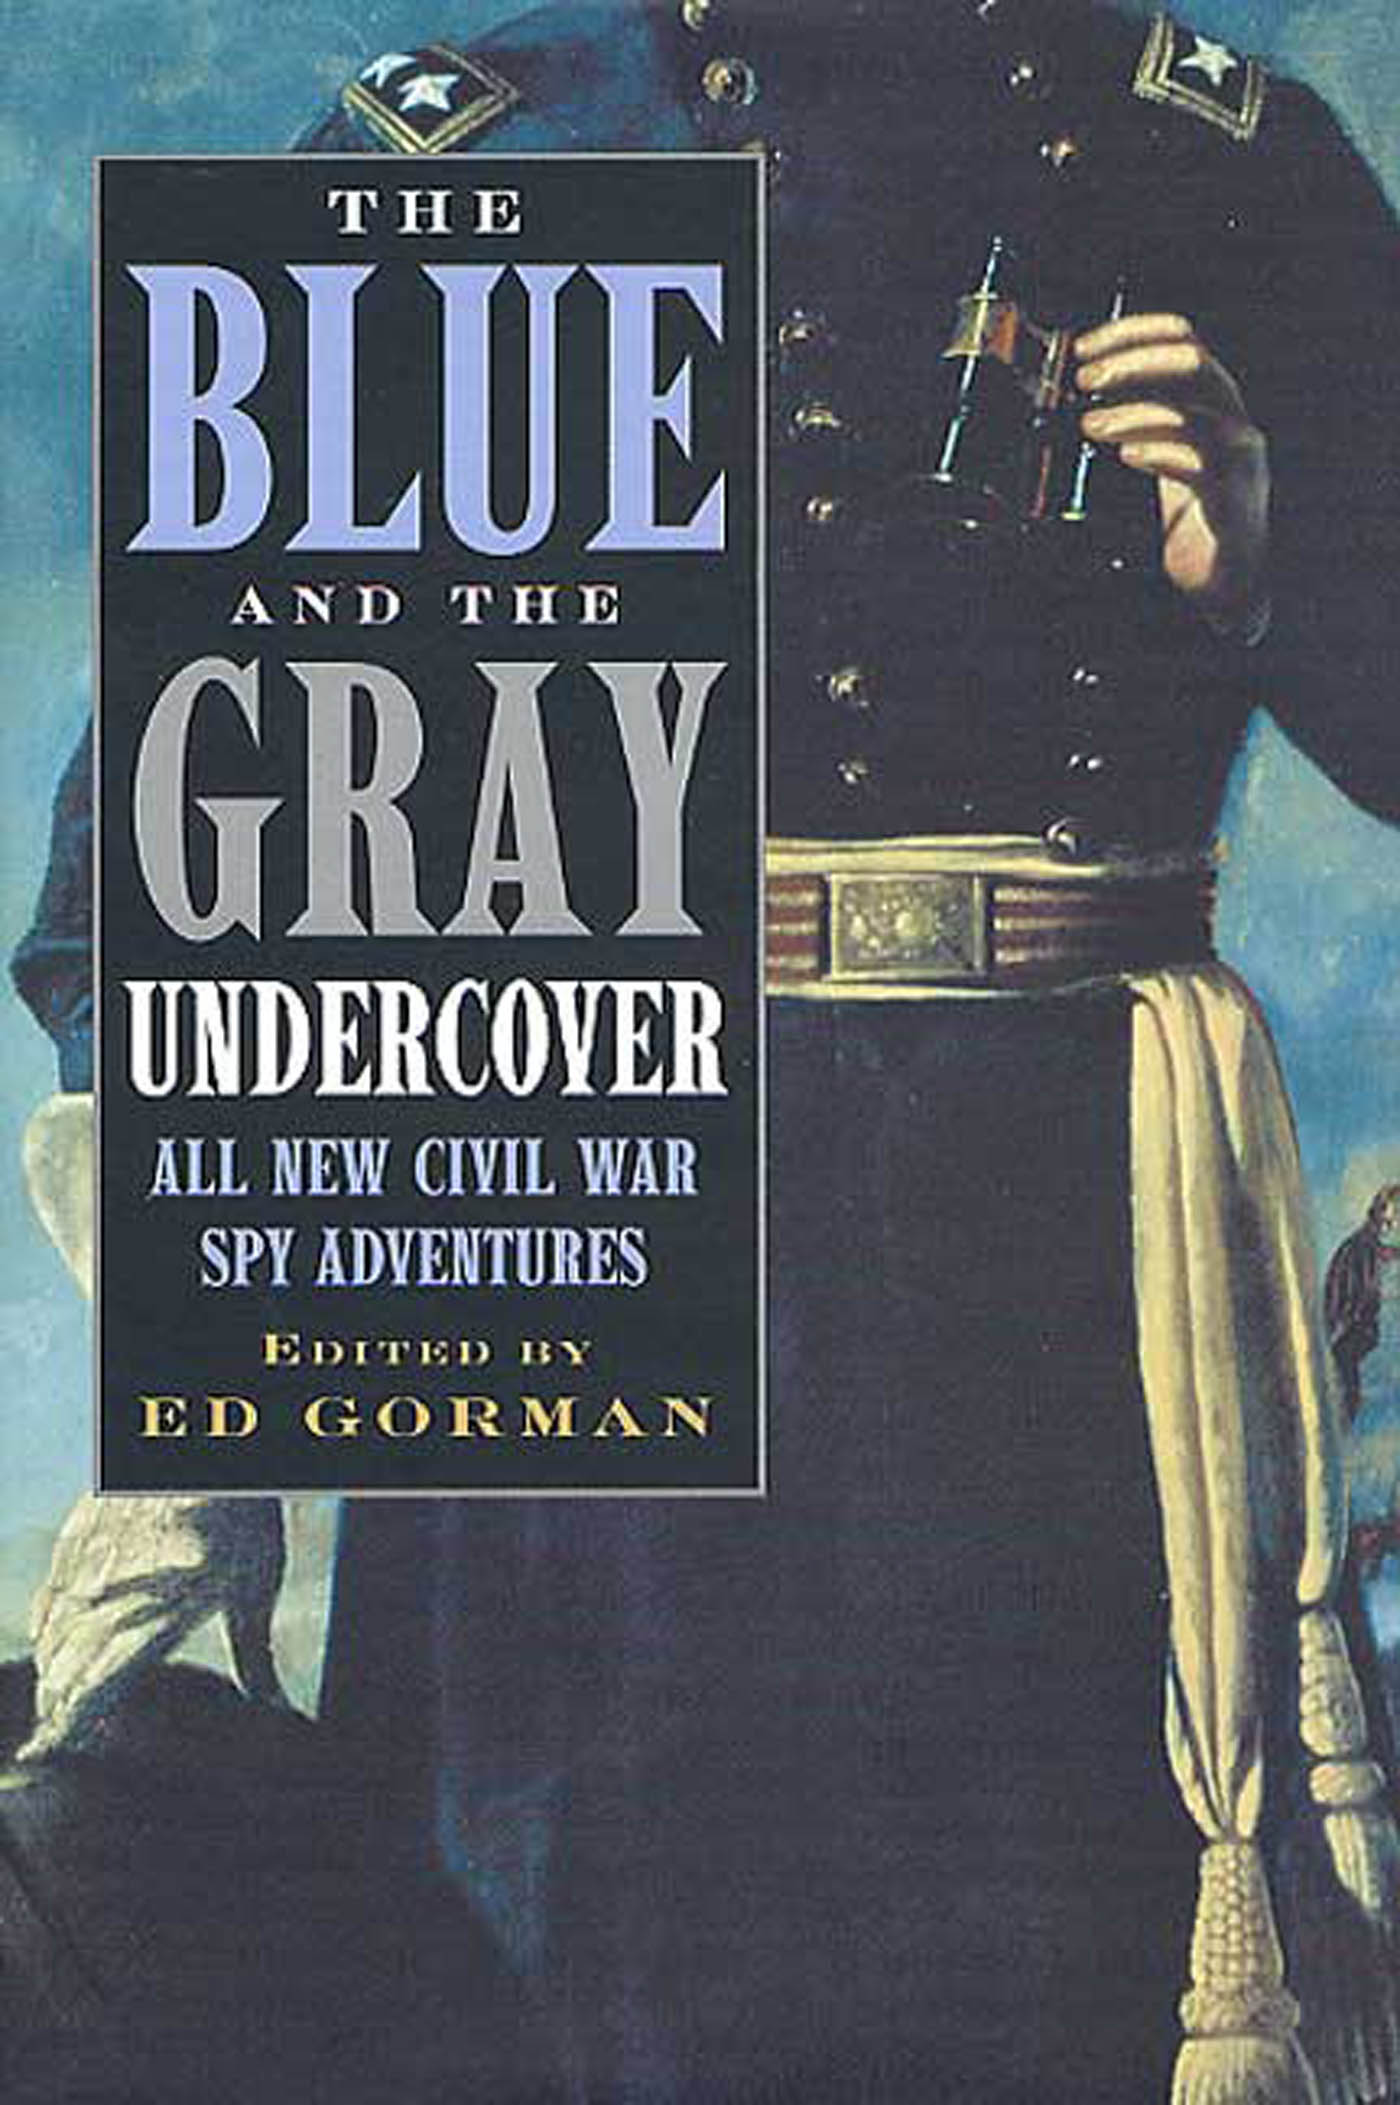 The Blue and the Gray Undercover : All New Civil War Spy Adventures by Ed Gorman